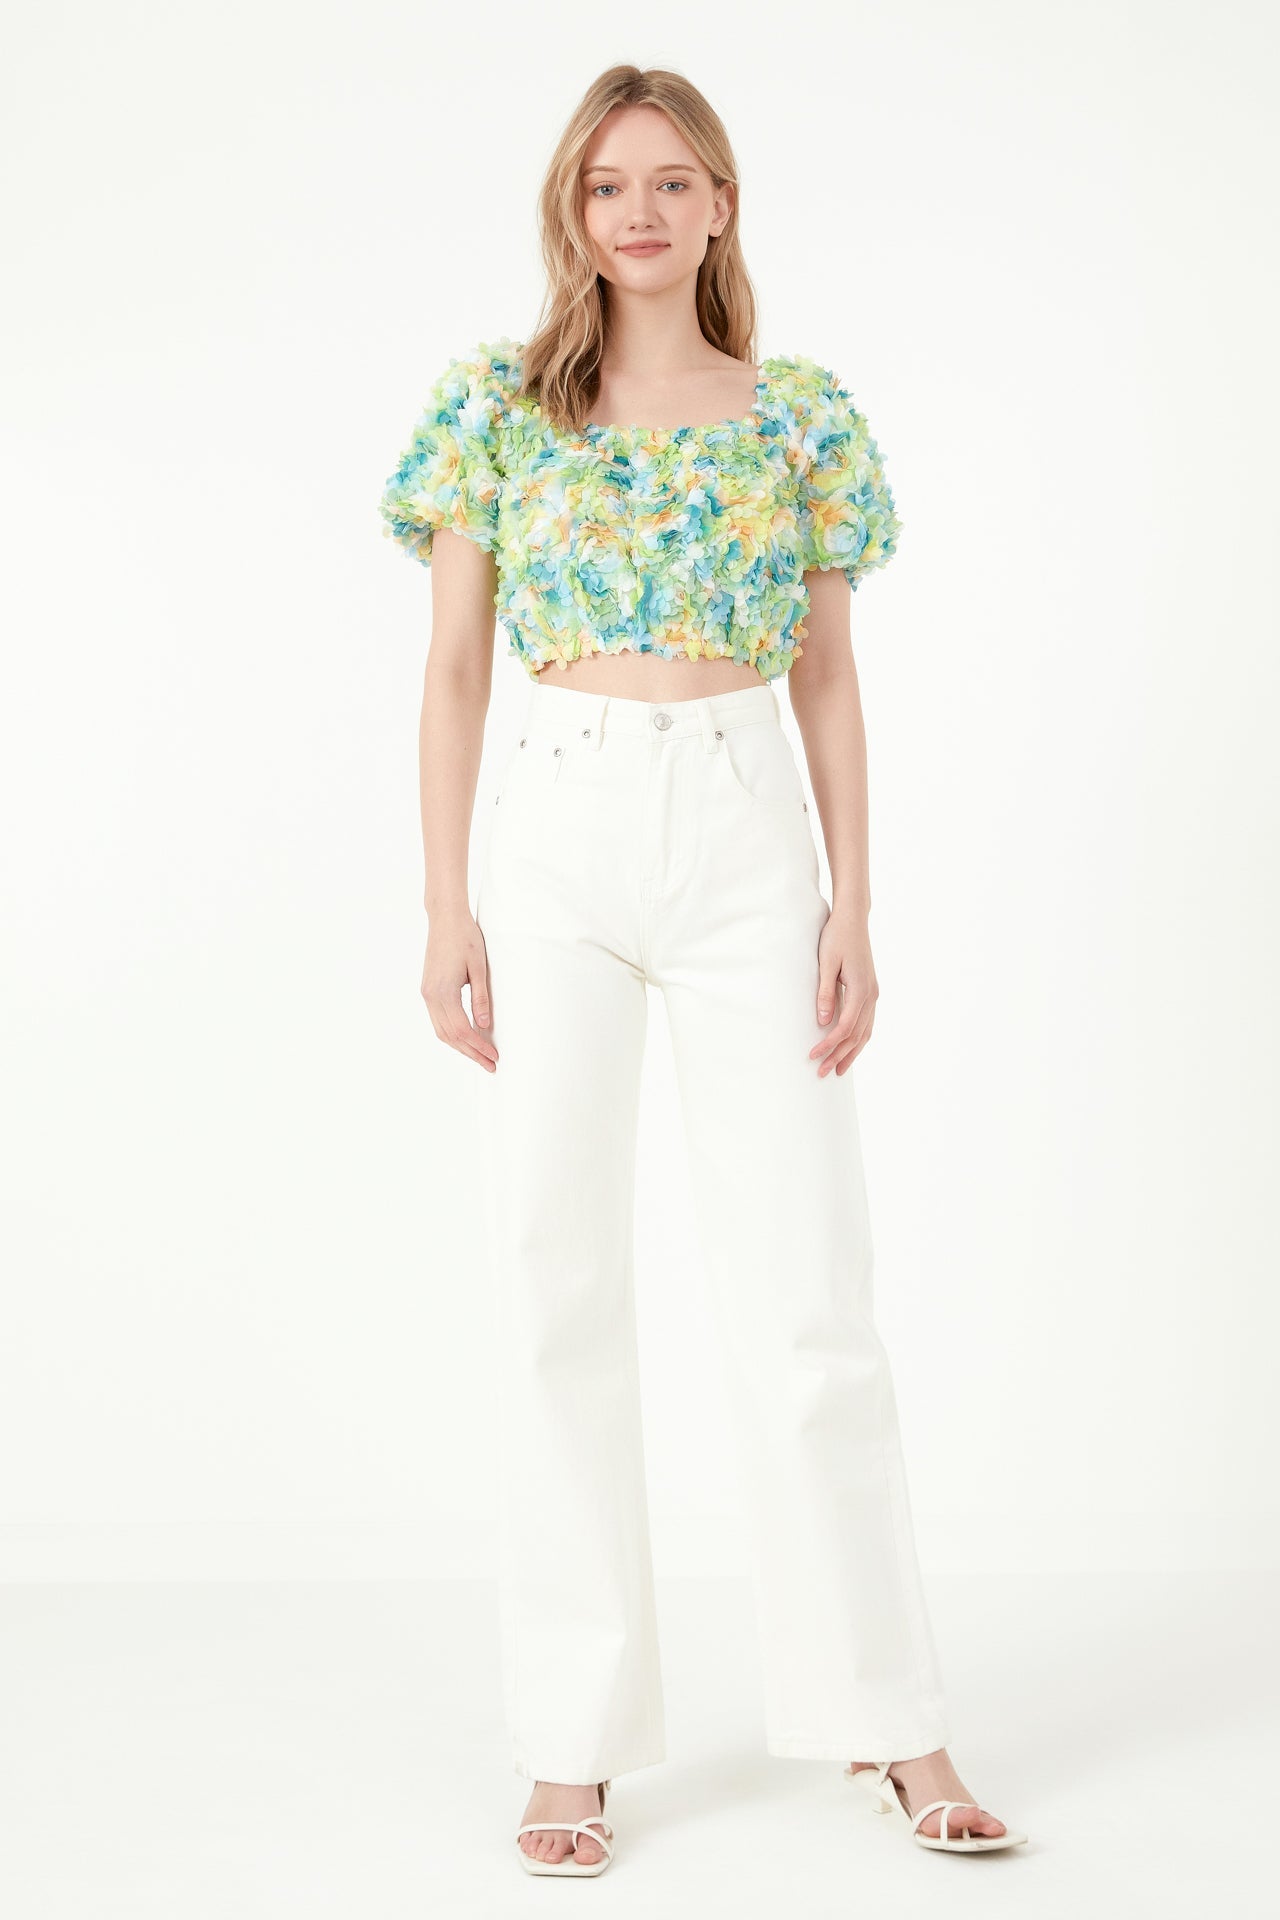 FREE THE ROSES - Multi Color embellishment Cropped Top - TOPS available at Objectrare